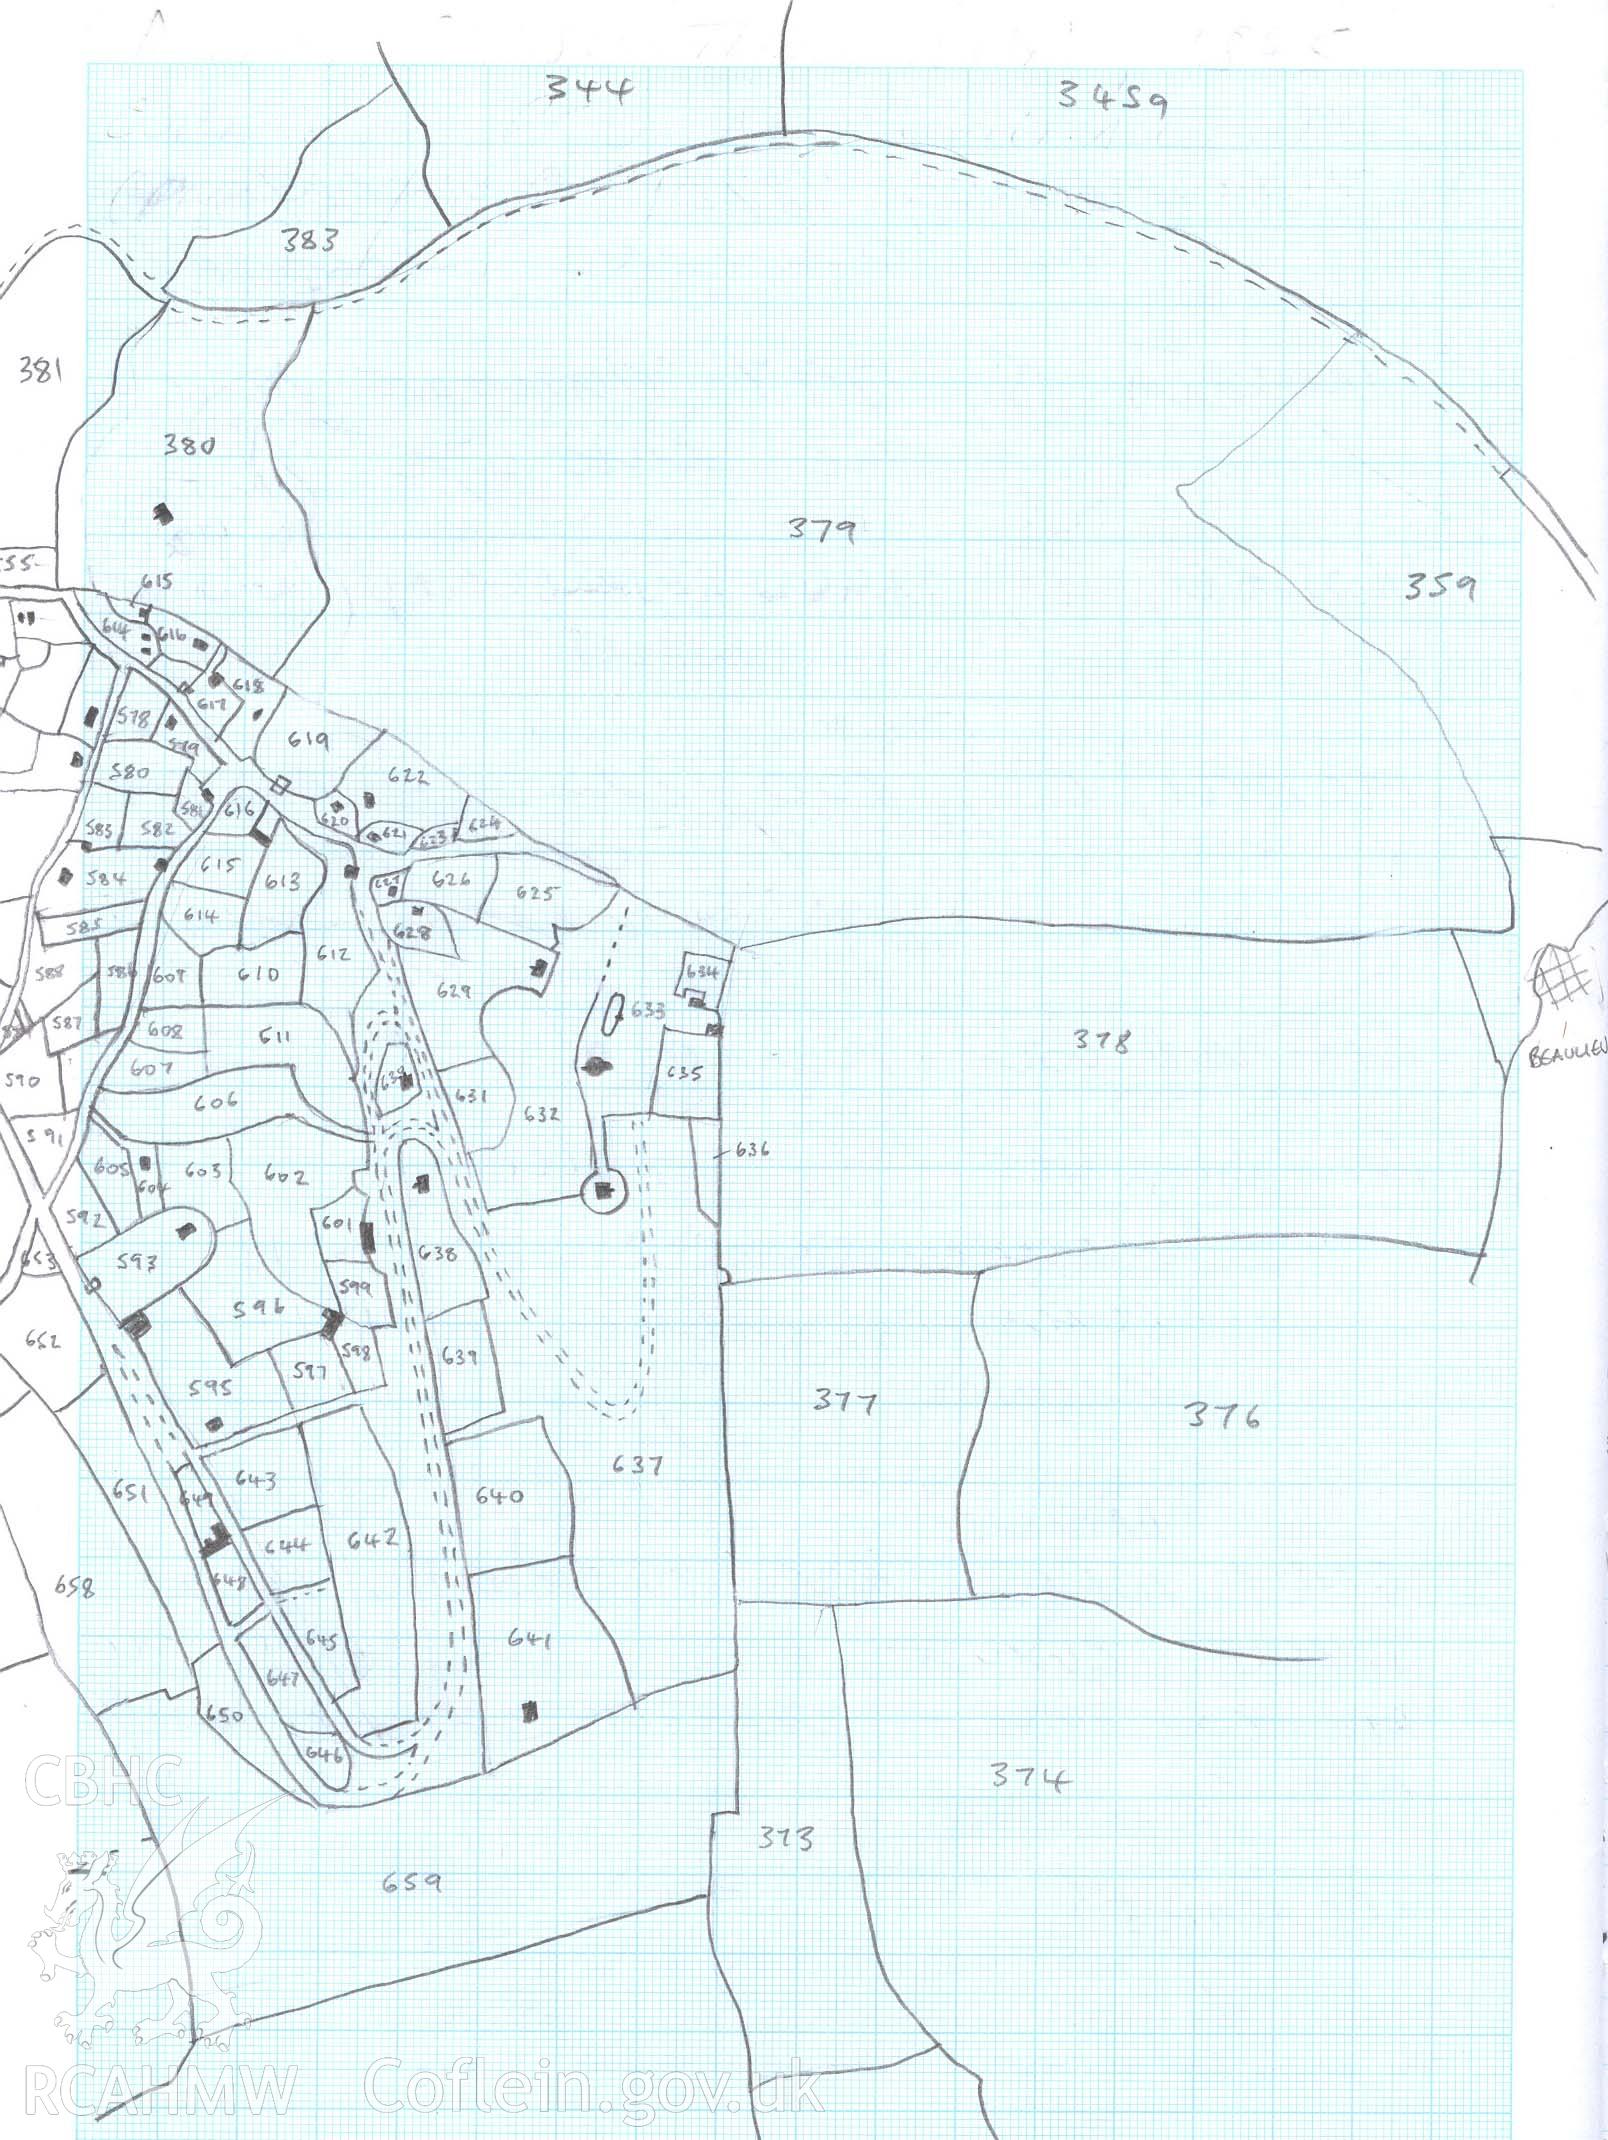 Digital copy of part of Tithe map showing the Kymin area.